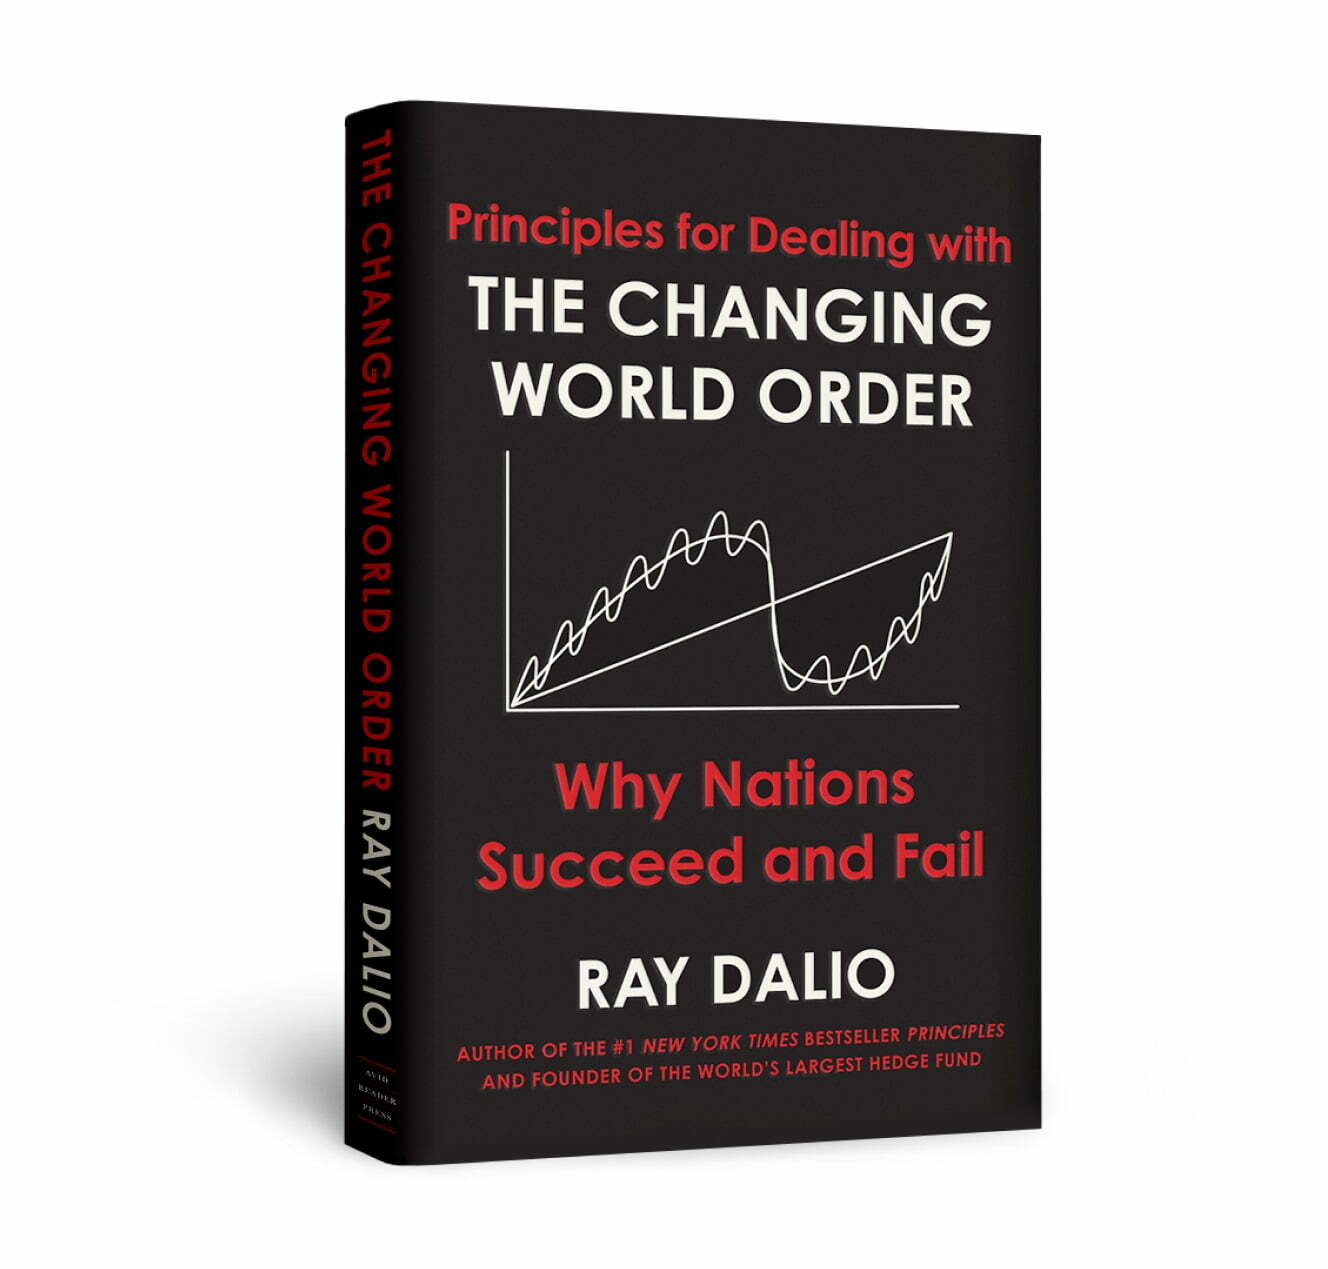 Navigating the Changing World Order: An Insightful Review of Ray Dalio's "Principles for Dealing with the Changing World Order"